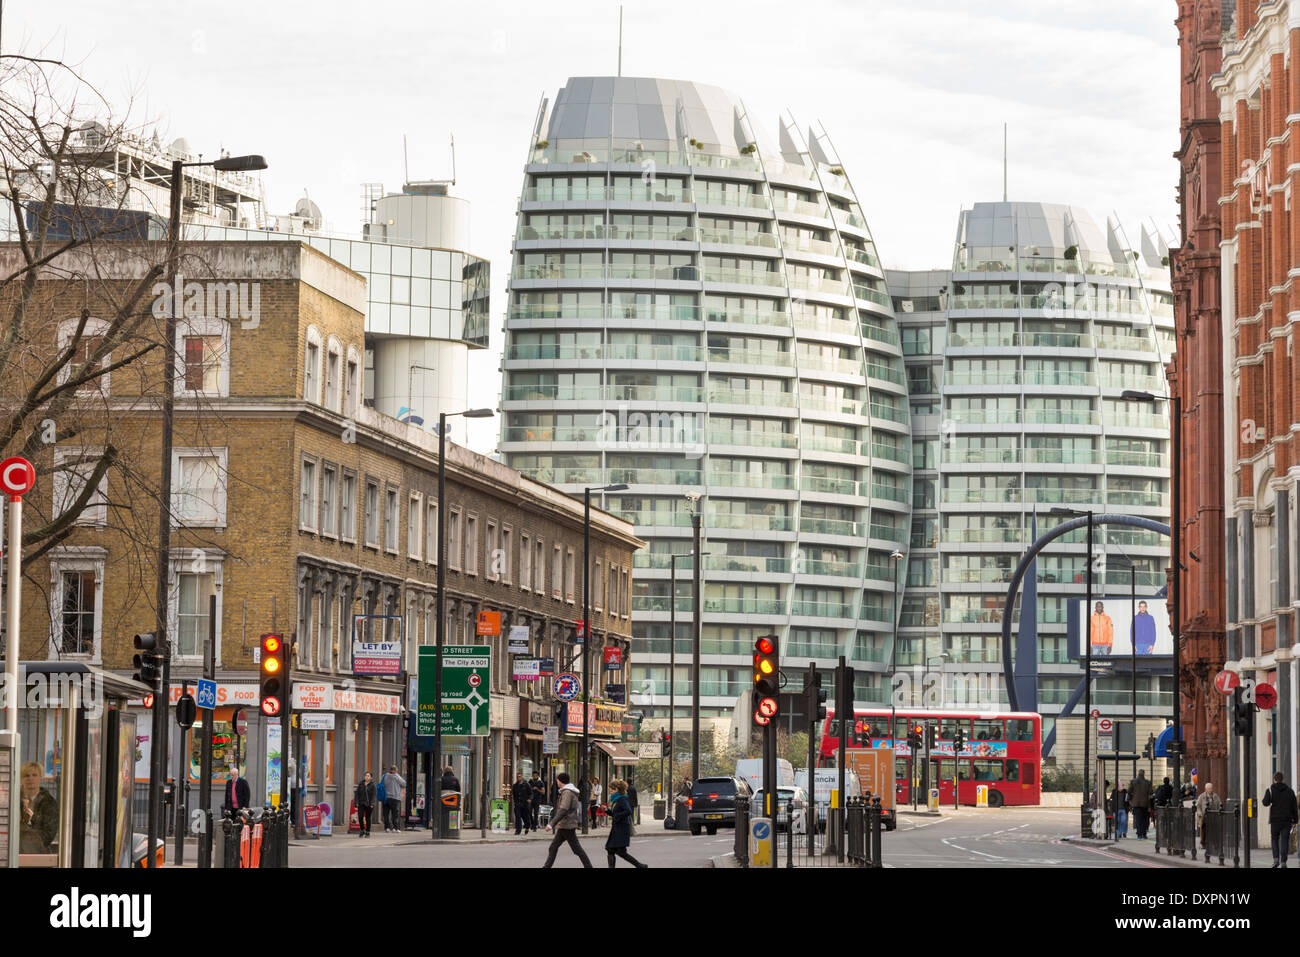 The Bezier Apartments on Old Street Roundabout, London, England, UK Stock Photo